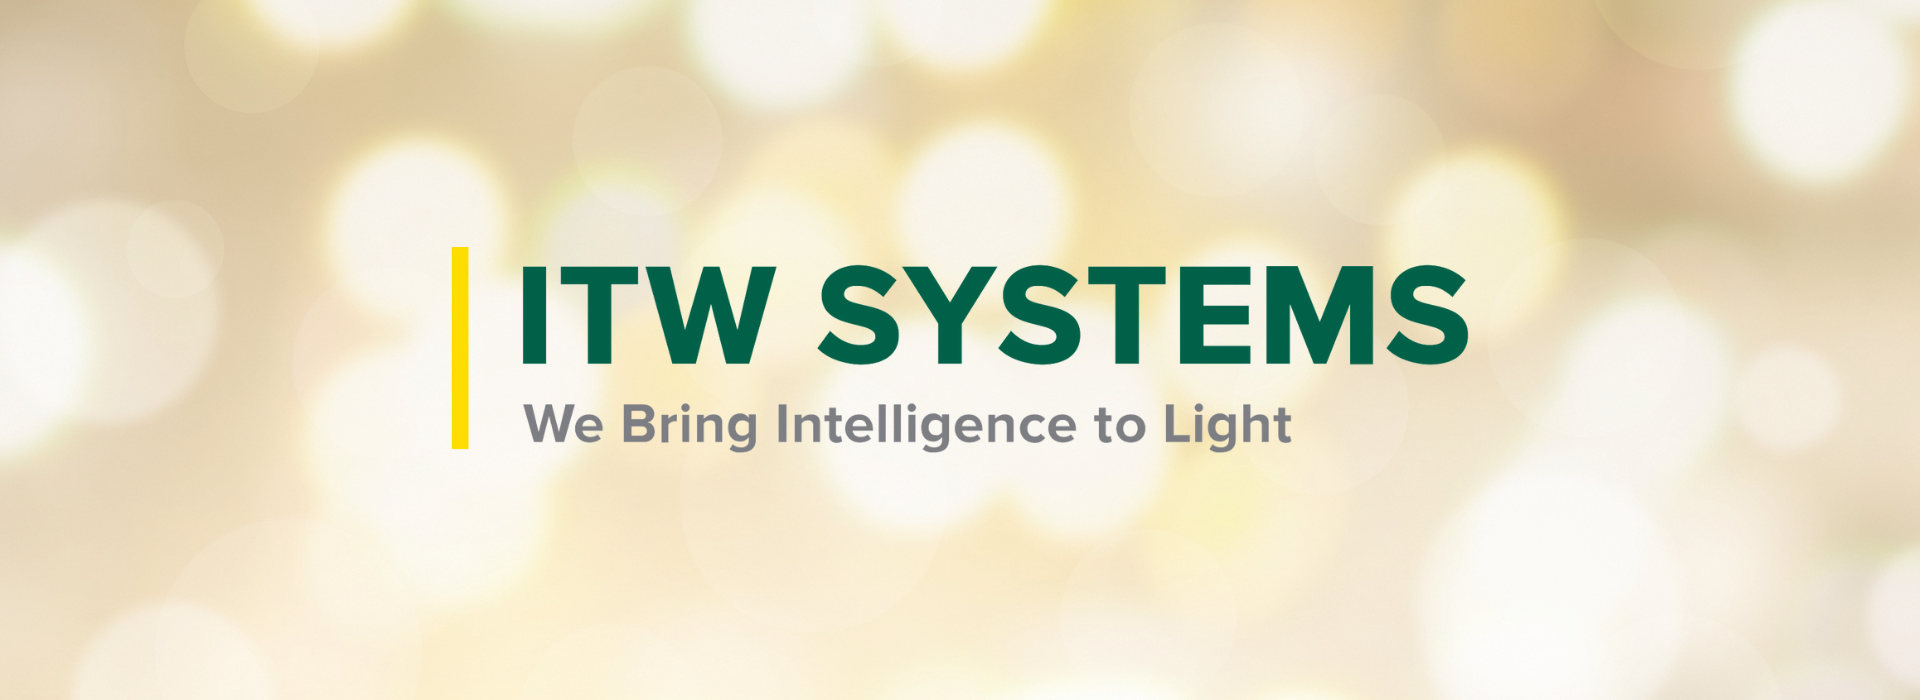 Light for the “City of Goodness”: ITW Systems Supporting Families in Crisis